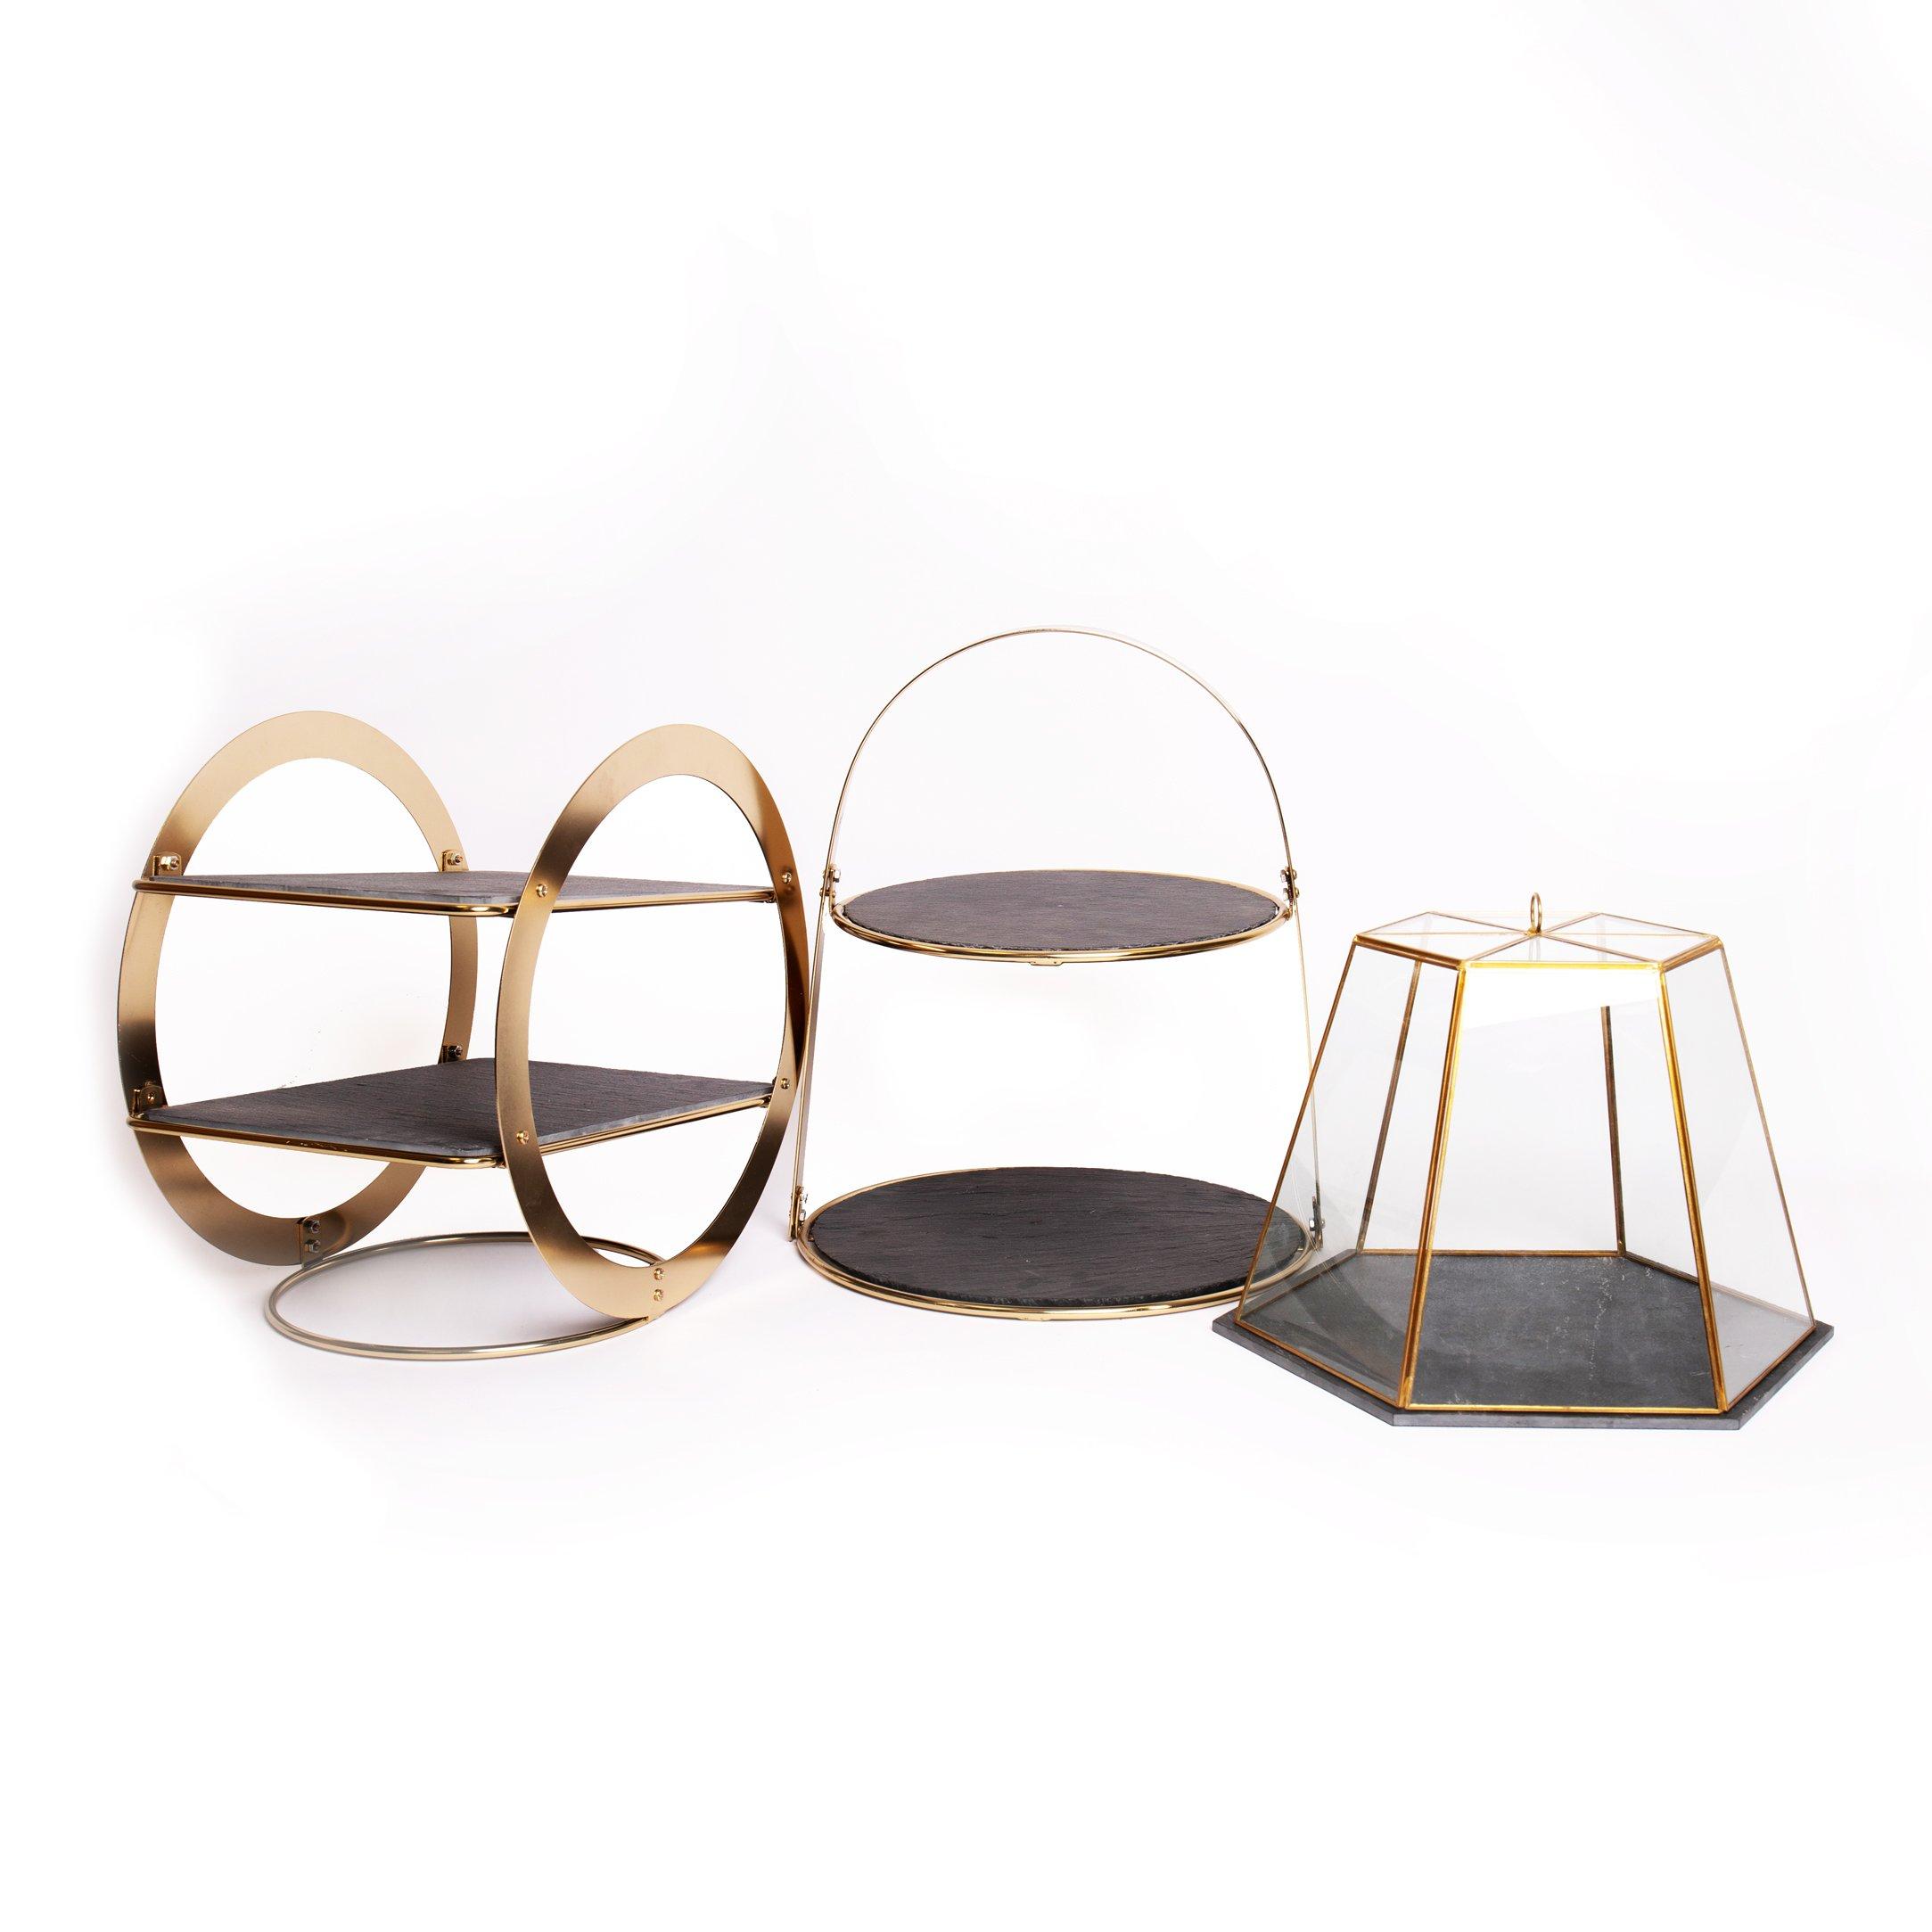 Serveware Set with 2-Tier Brass Cake Stand; 2-Tier Geometric Brass Serving Stand & Glass Serving Clo